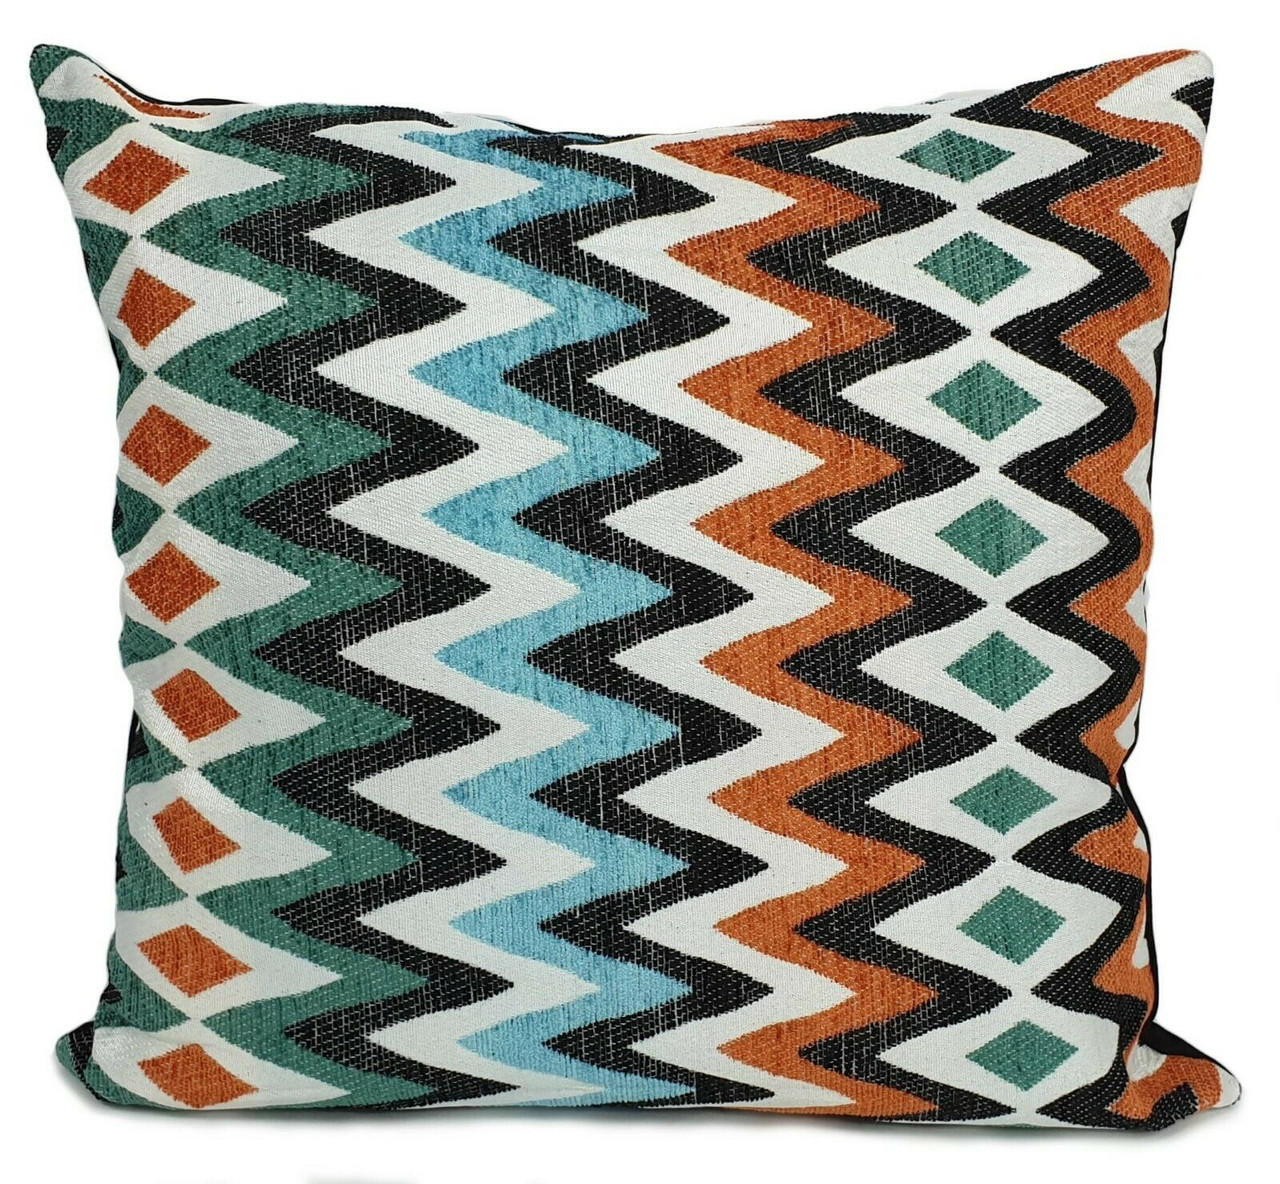 Cushions New Soft Chenille ZIGZAG Scatter Cushions or Covers 17" X "17" ORANGE BLUE